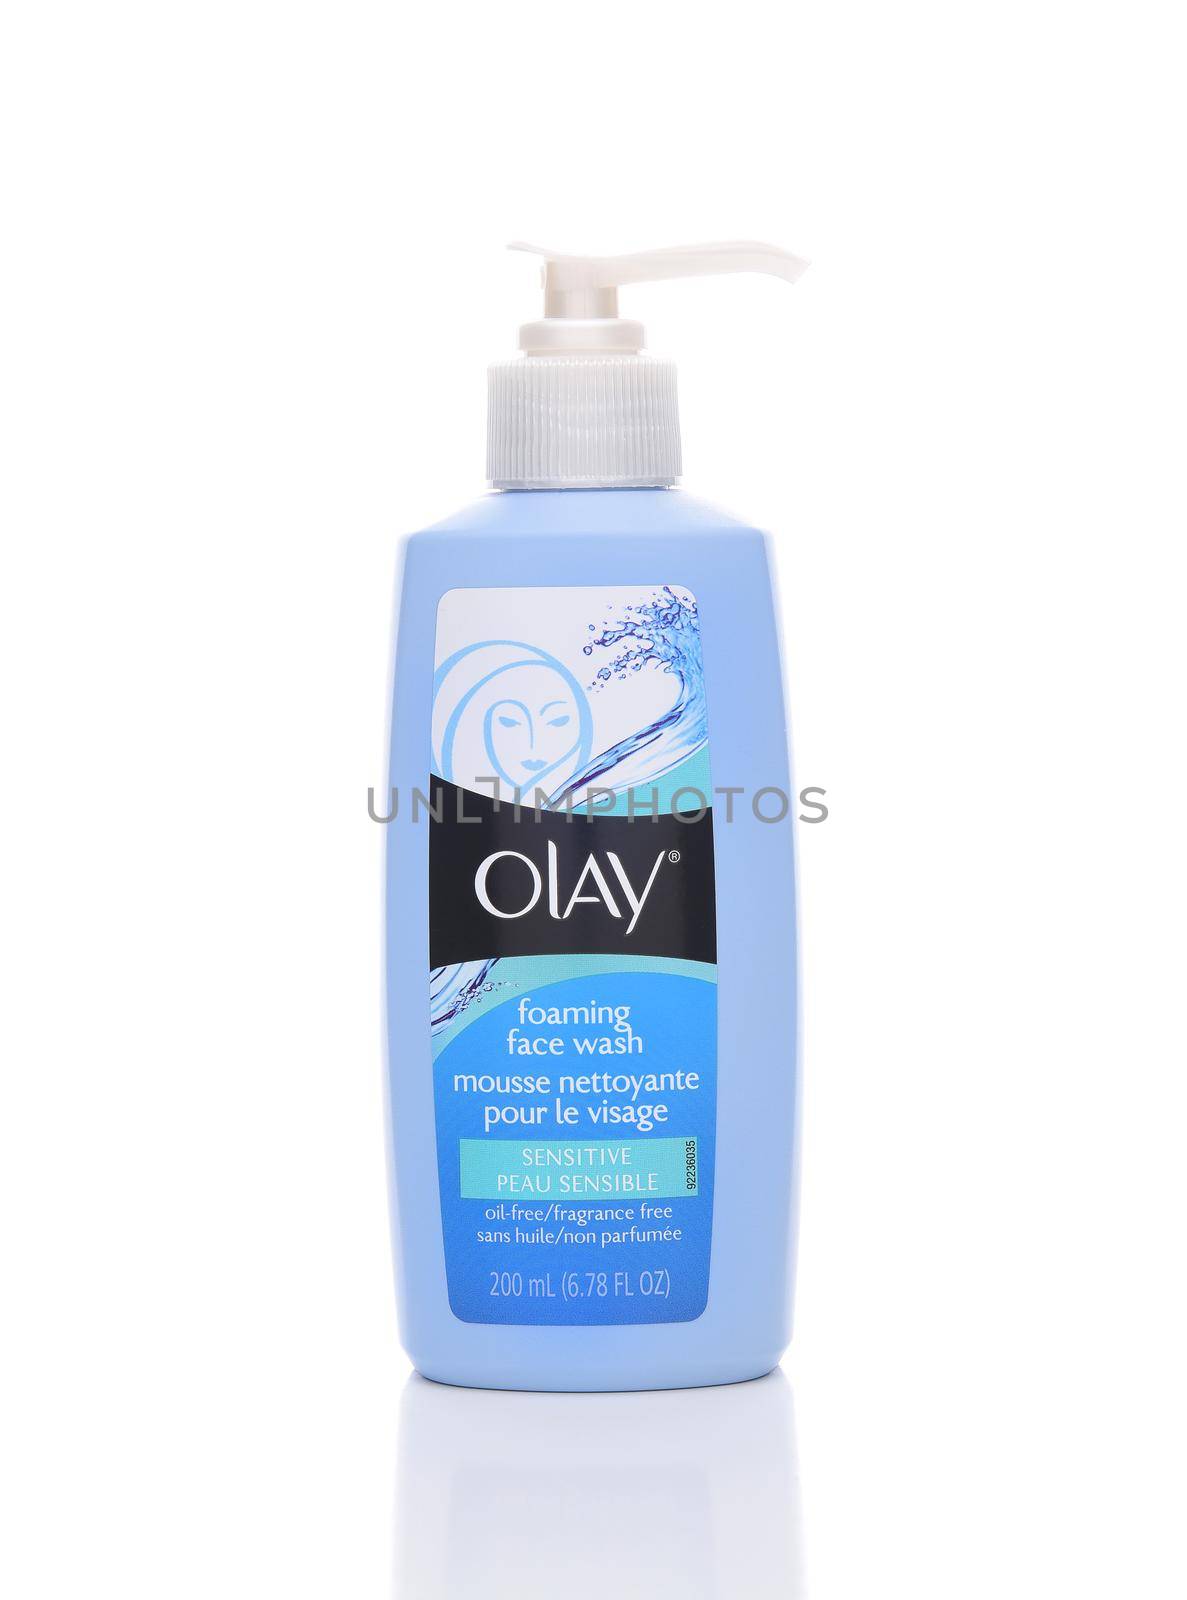 Olay Foaming Face Wash by sCukrov